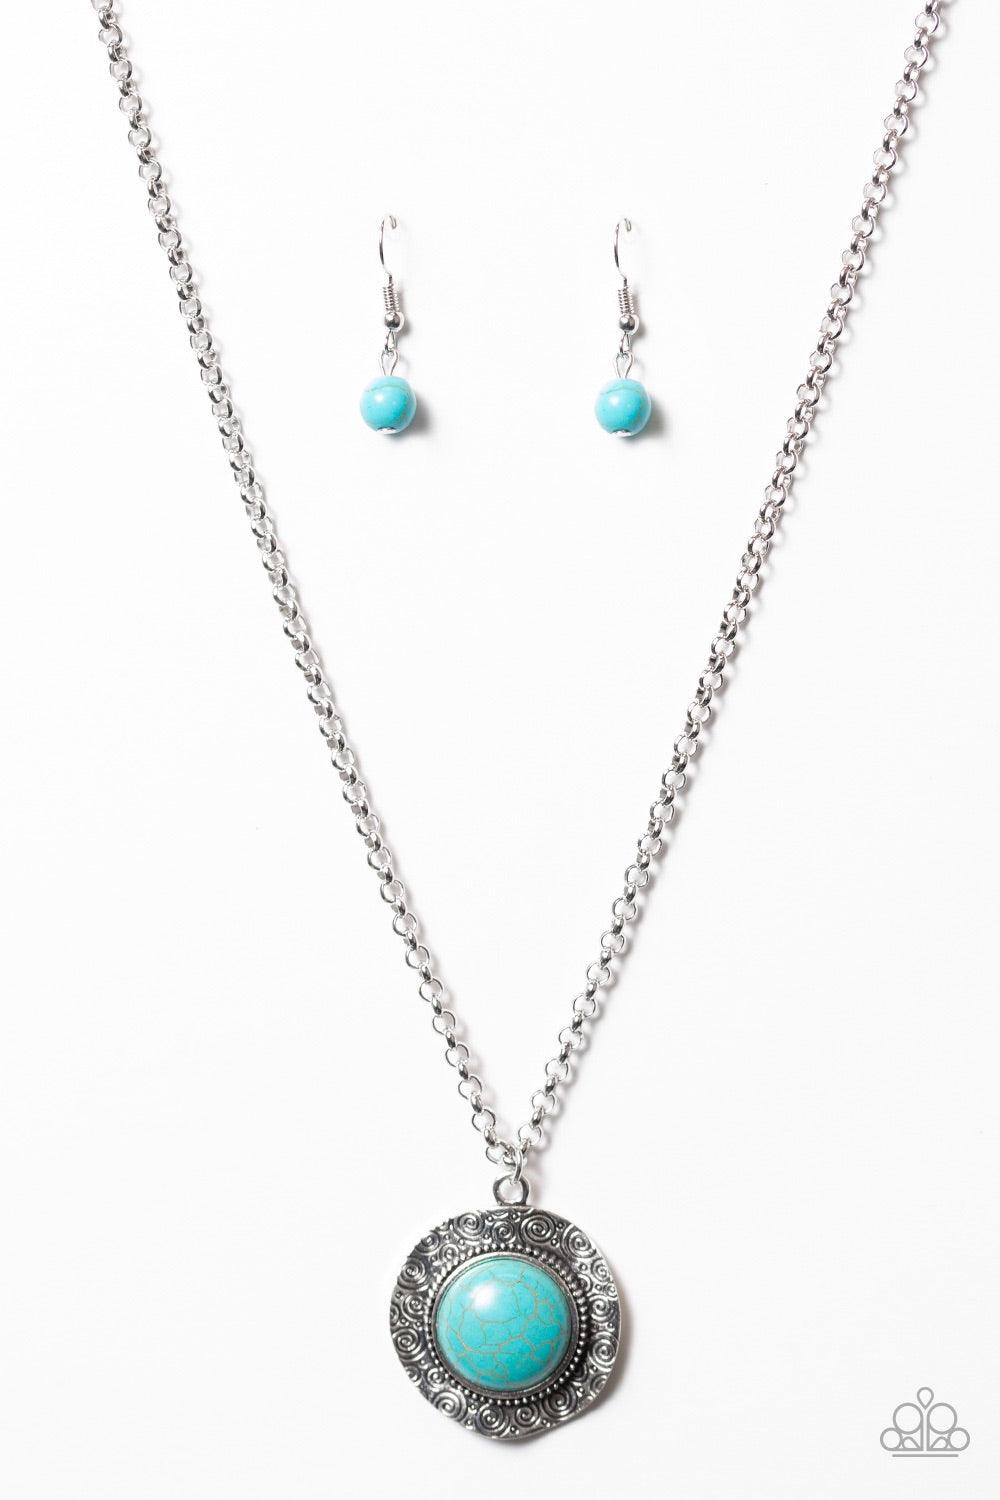 Paparazzi Accessories Course of Nature - Blue Stamped in dizzying swirls, a delicately hammered silver frame spins around a turquoise stone center for a handcrafted, artisanal look. Features an adjustable clasp closure. Jewelry